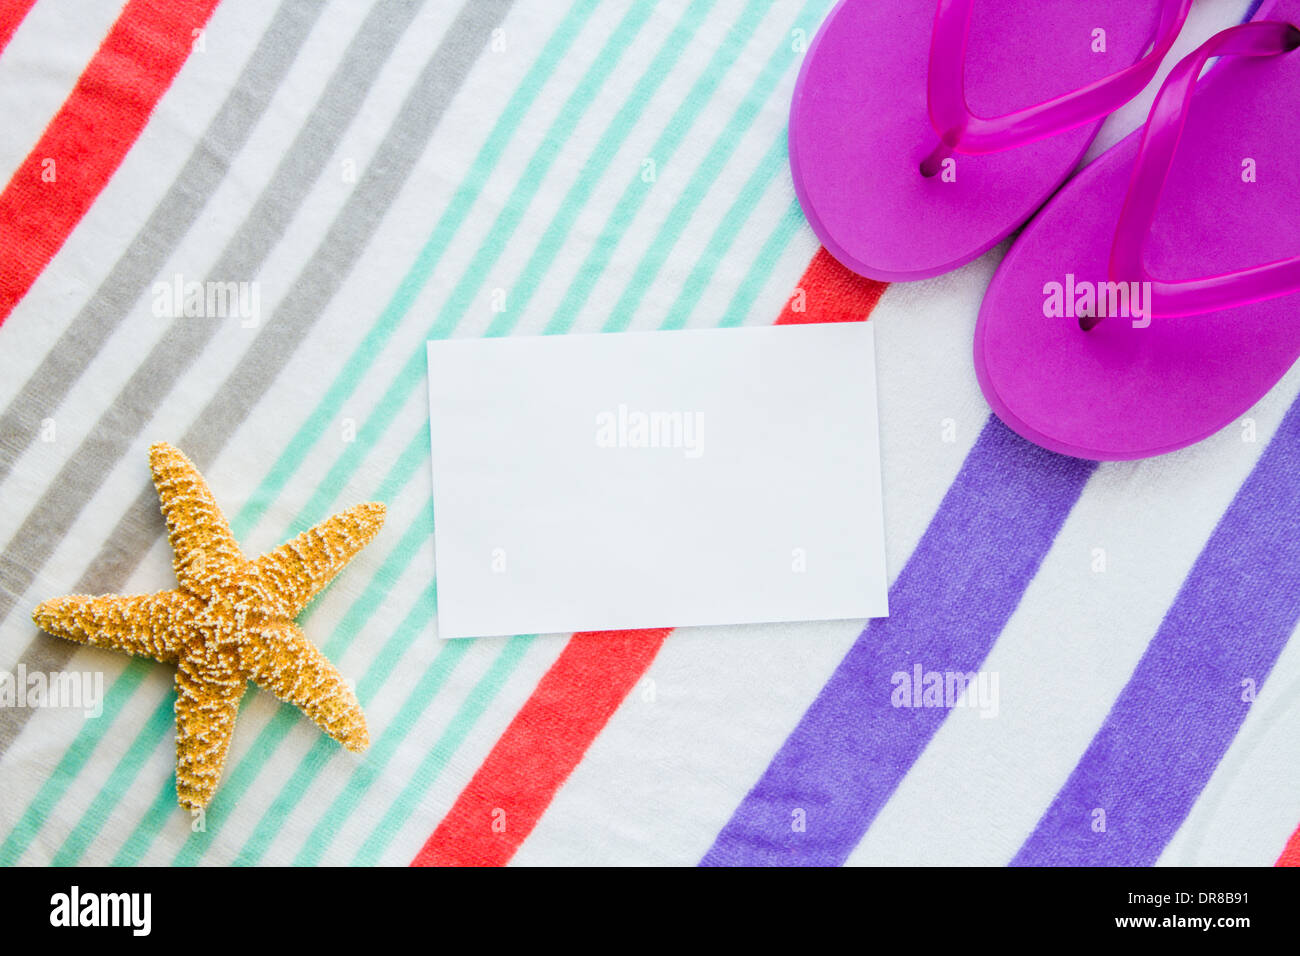 Beach scene with purple flip flops and a starfish on a striped beach towel with copy space. Stock Photo